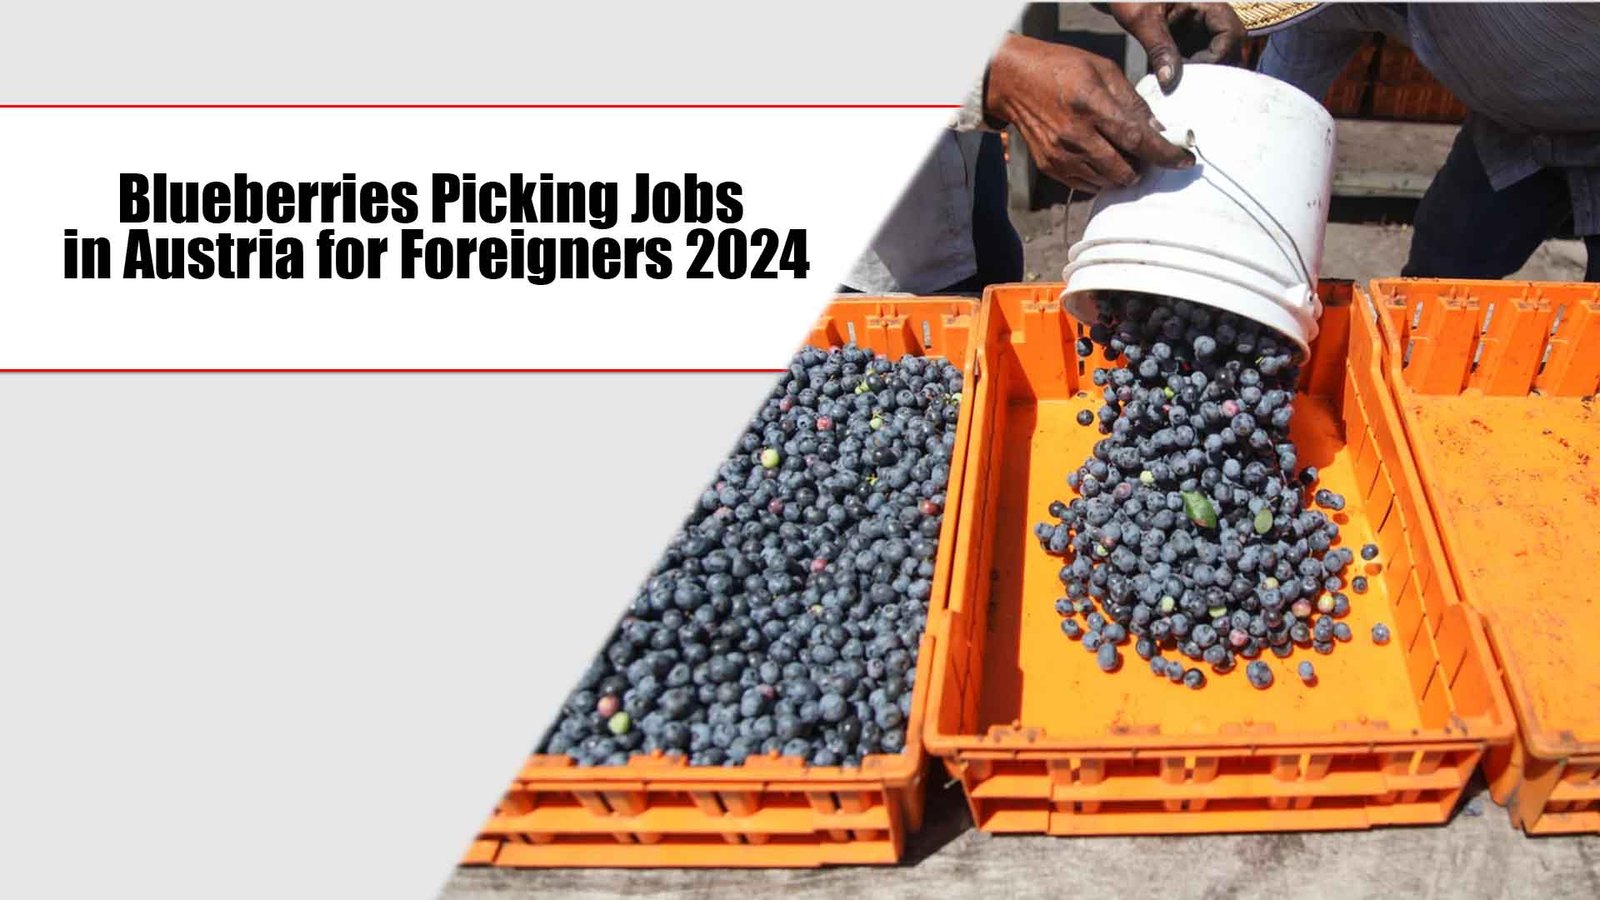 Blueberries Picking Jobs in Austria for Foreigners 2024